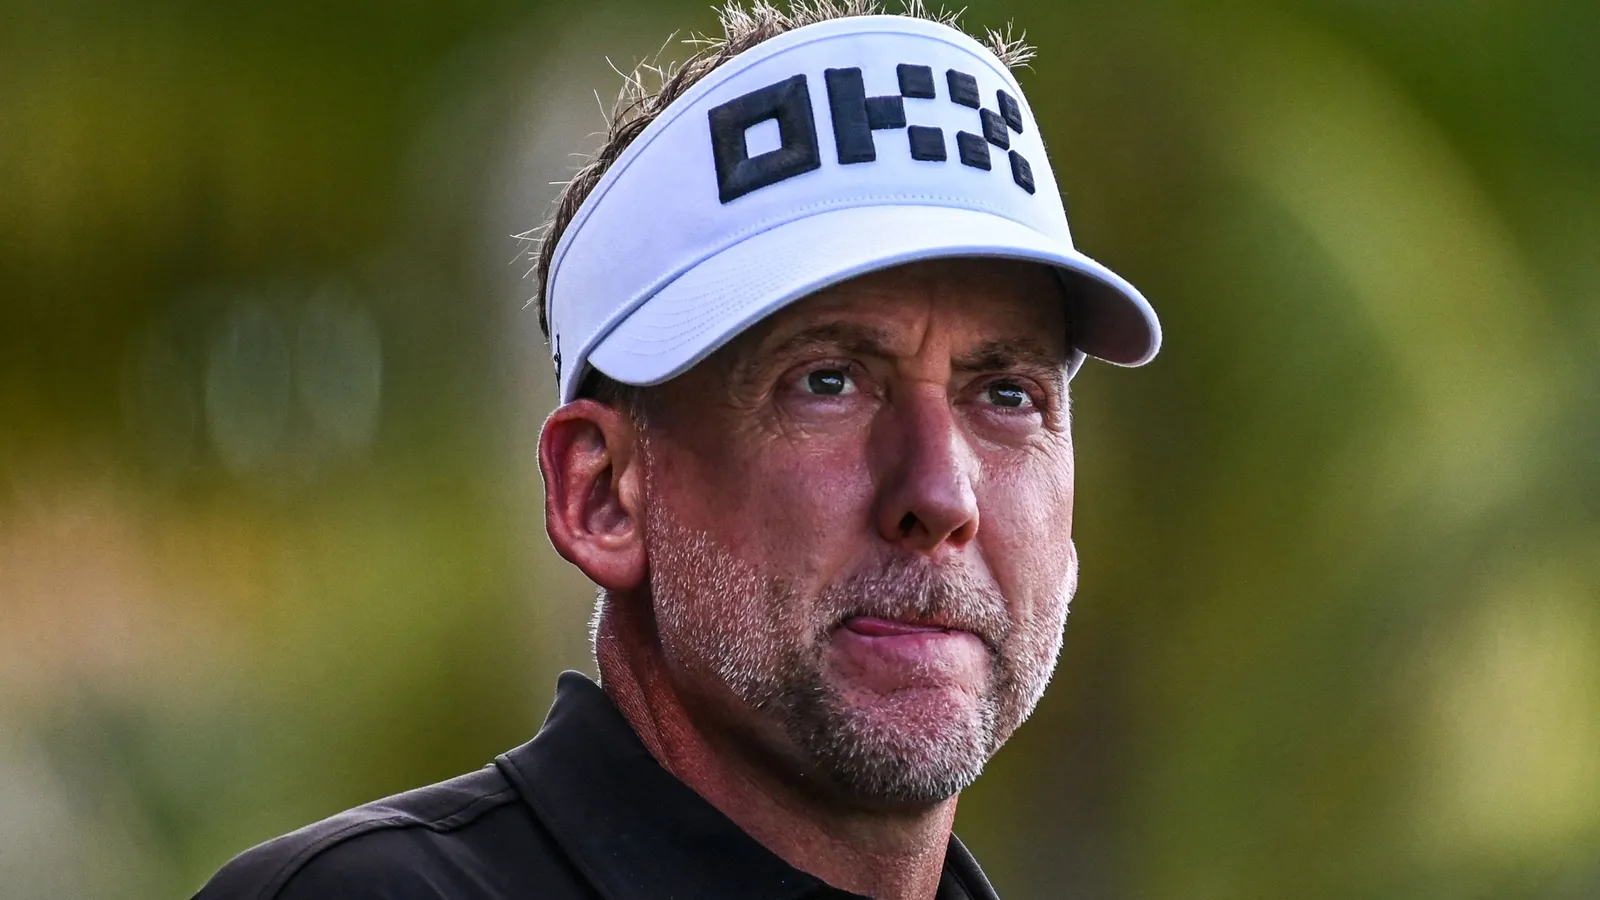 'The Irony' - Ian Poulter Mocks PGA Tour For Copying LIV Golf Format